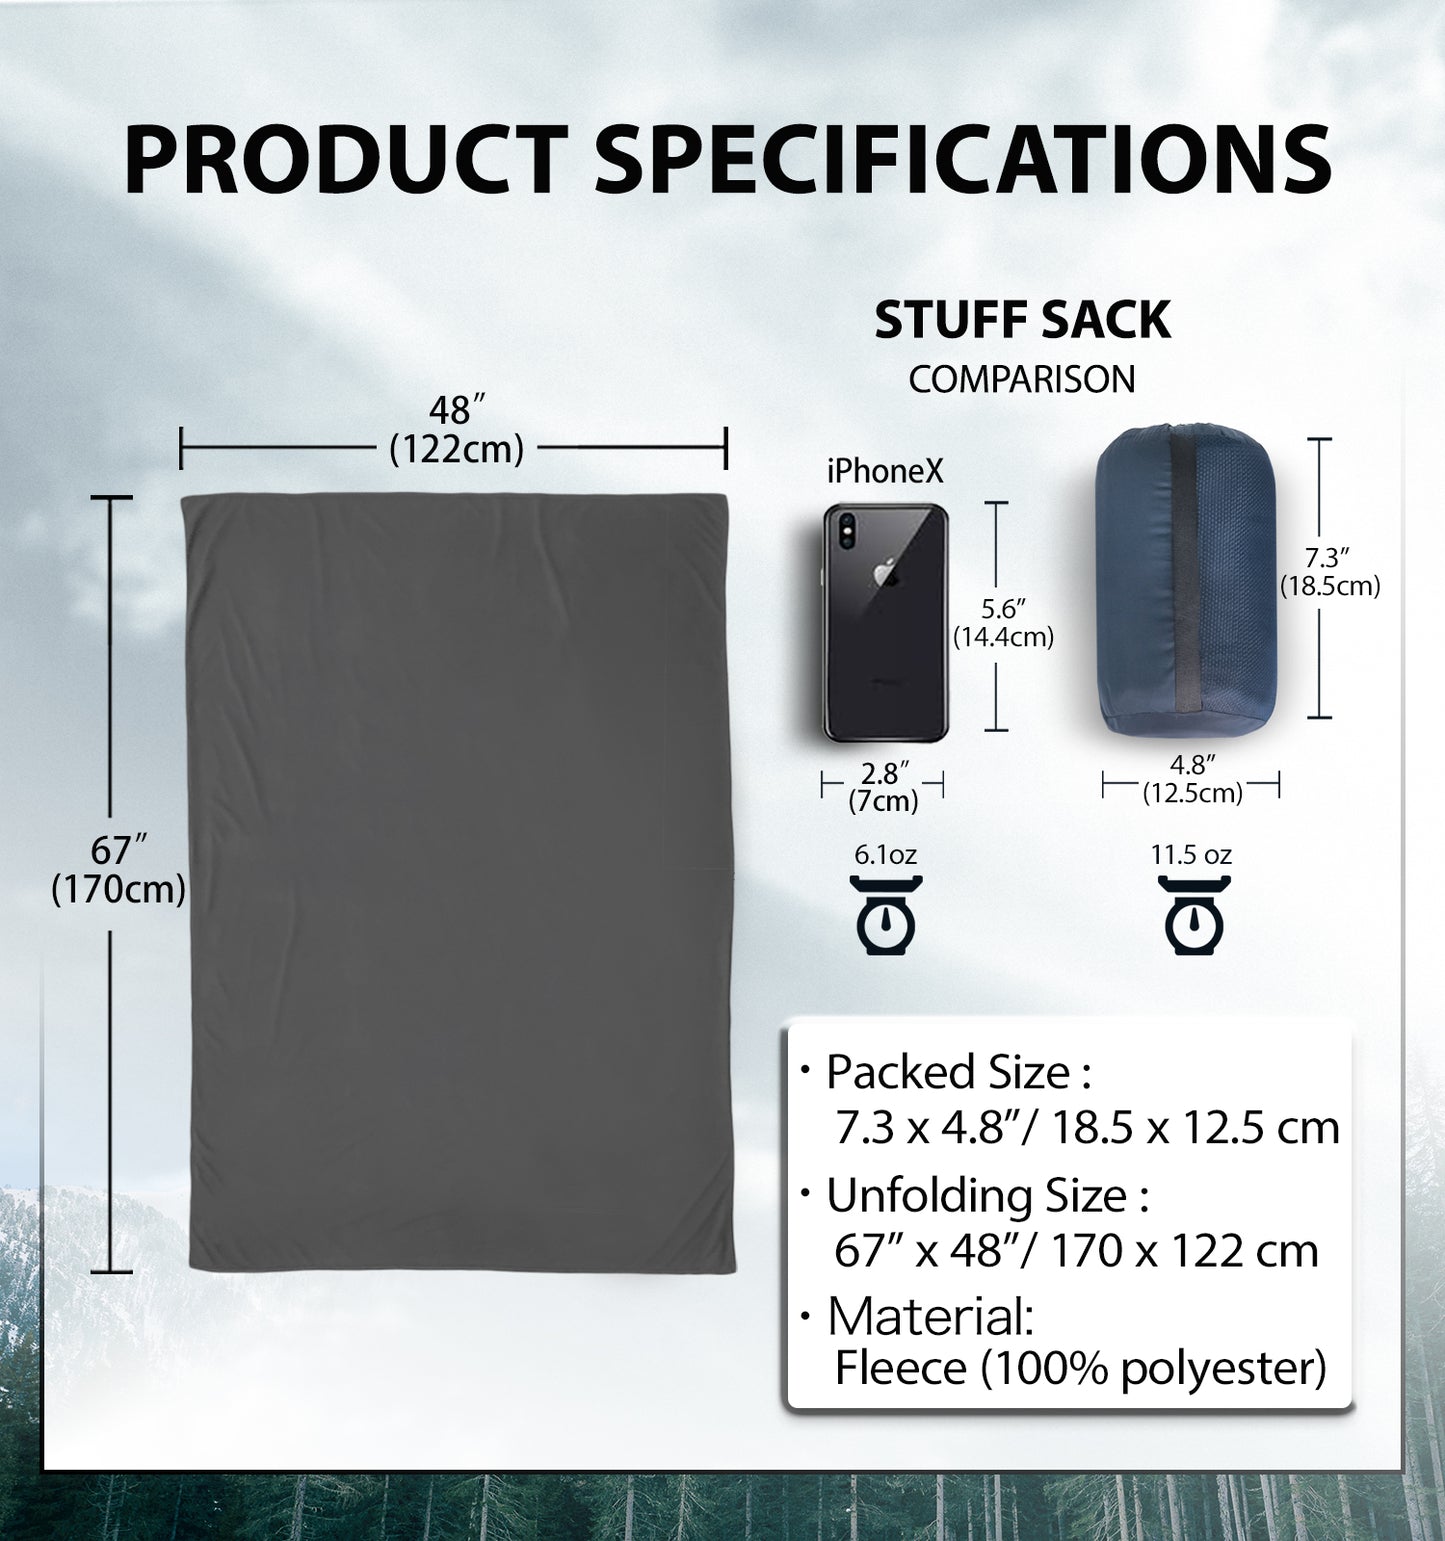 litume cocoon E651 Fleece Travel Blanket Ultra Warm compact portable airplane air flight train car auto road trip small size mini drawstring cord anti static summer thin camping hiking backpacking cold warm bikepacking outdoor home hostal